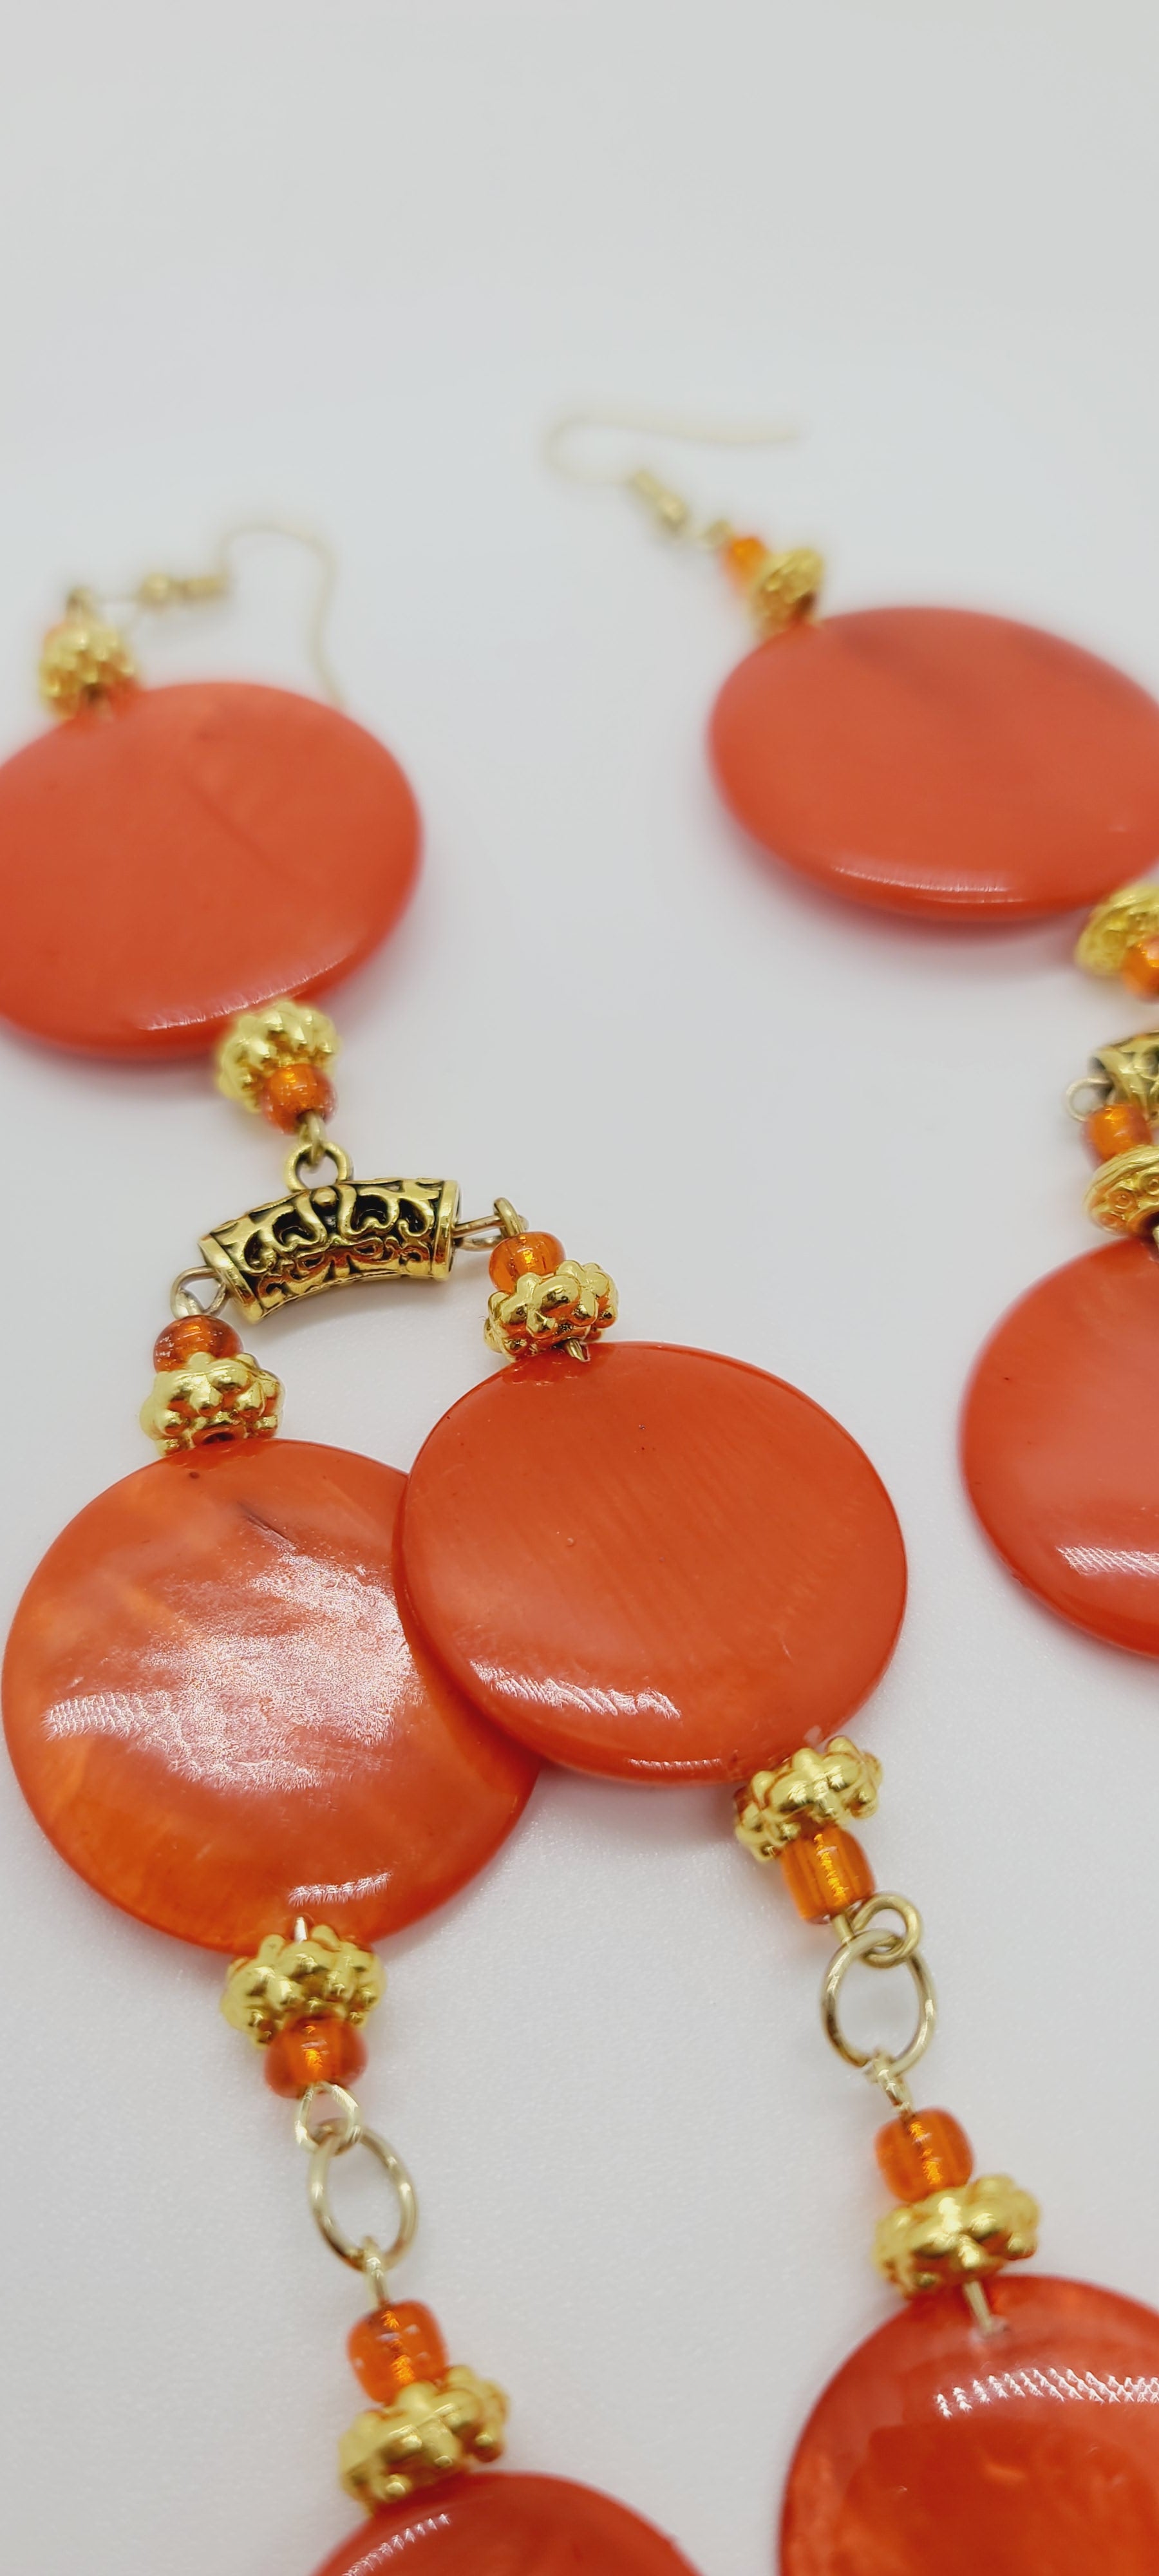 Length: 10 inches | Weight: 2.4 ounces  Distinctly You! These earrings are made with orange glass circular disc, orange tassels, accented with gold spacers, orange glass seed beads, and gold bail.